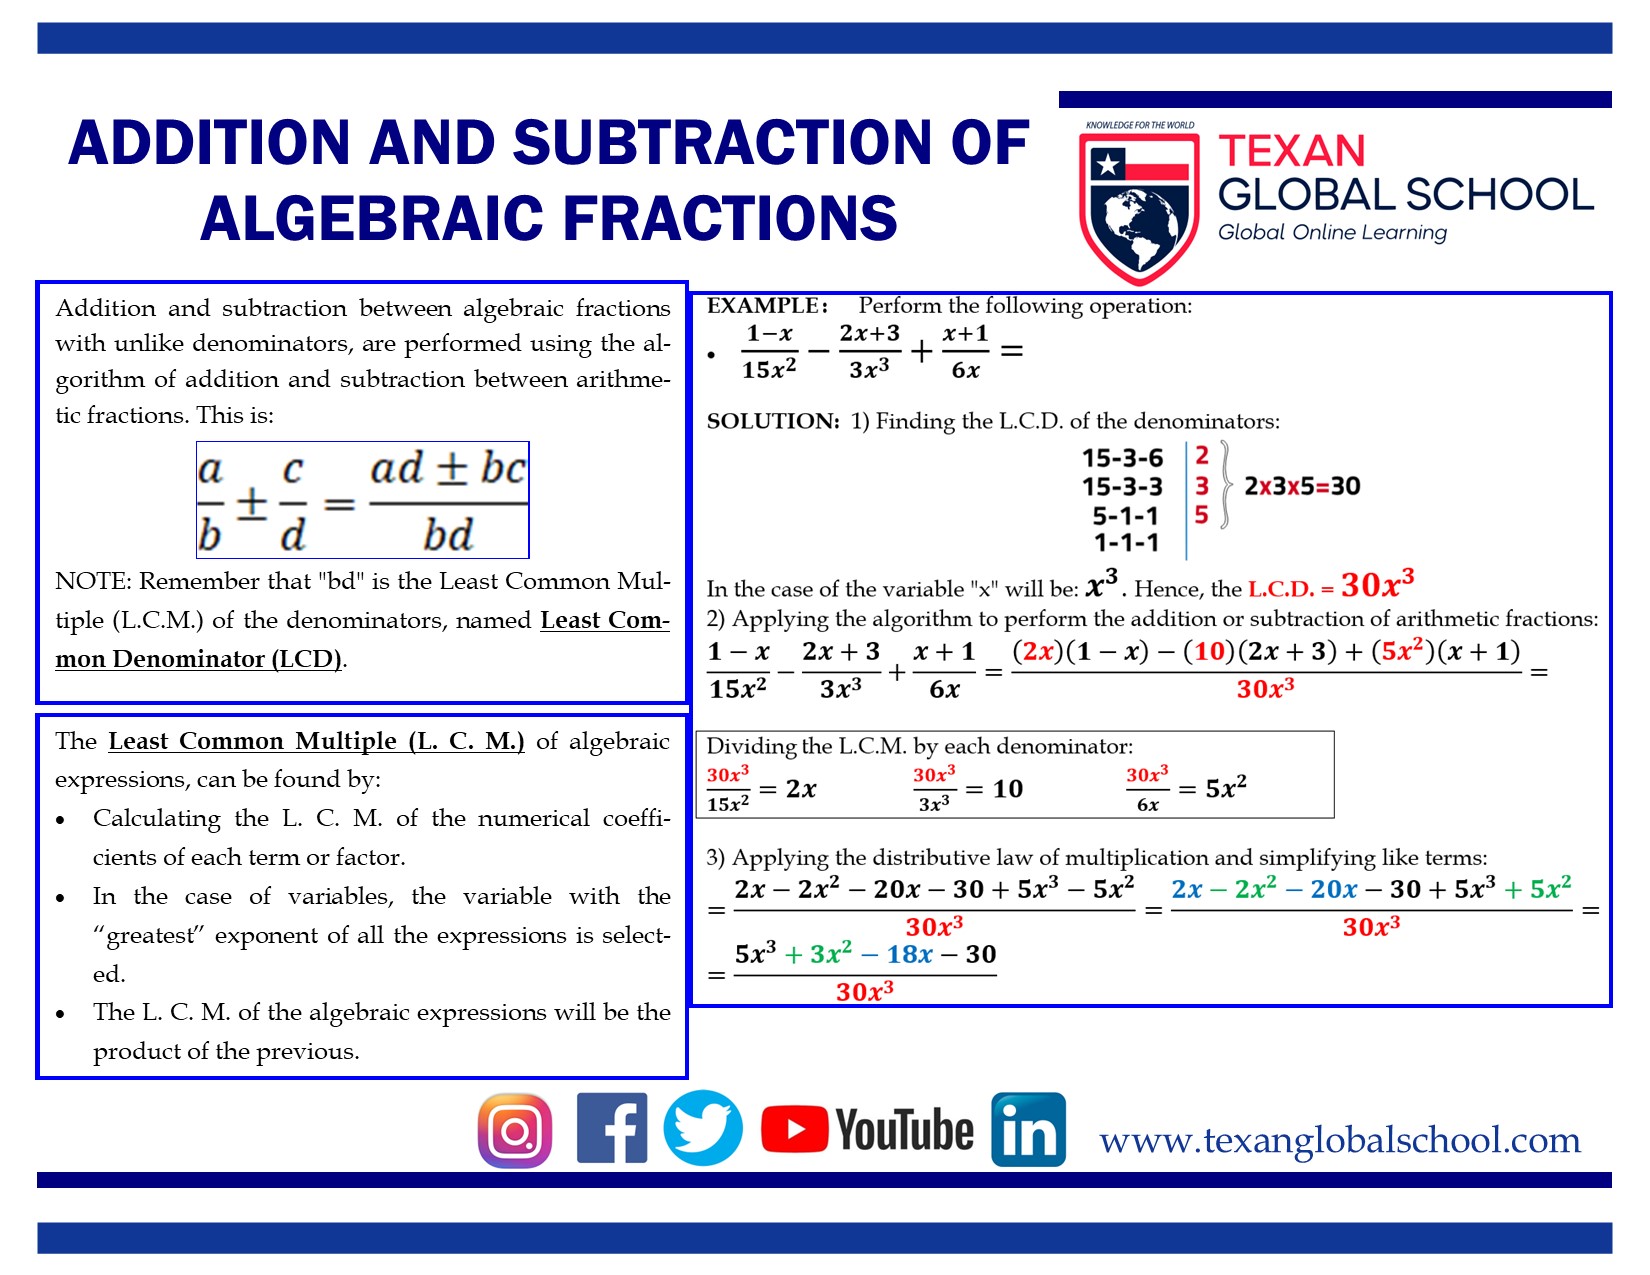 Addition and Subtraction between Algebraic Fractions – Part 2